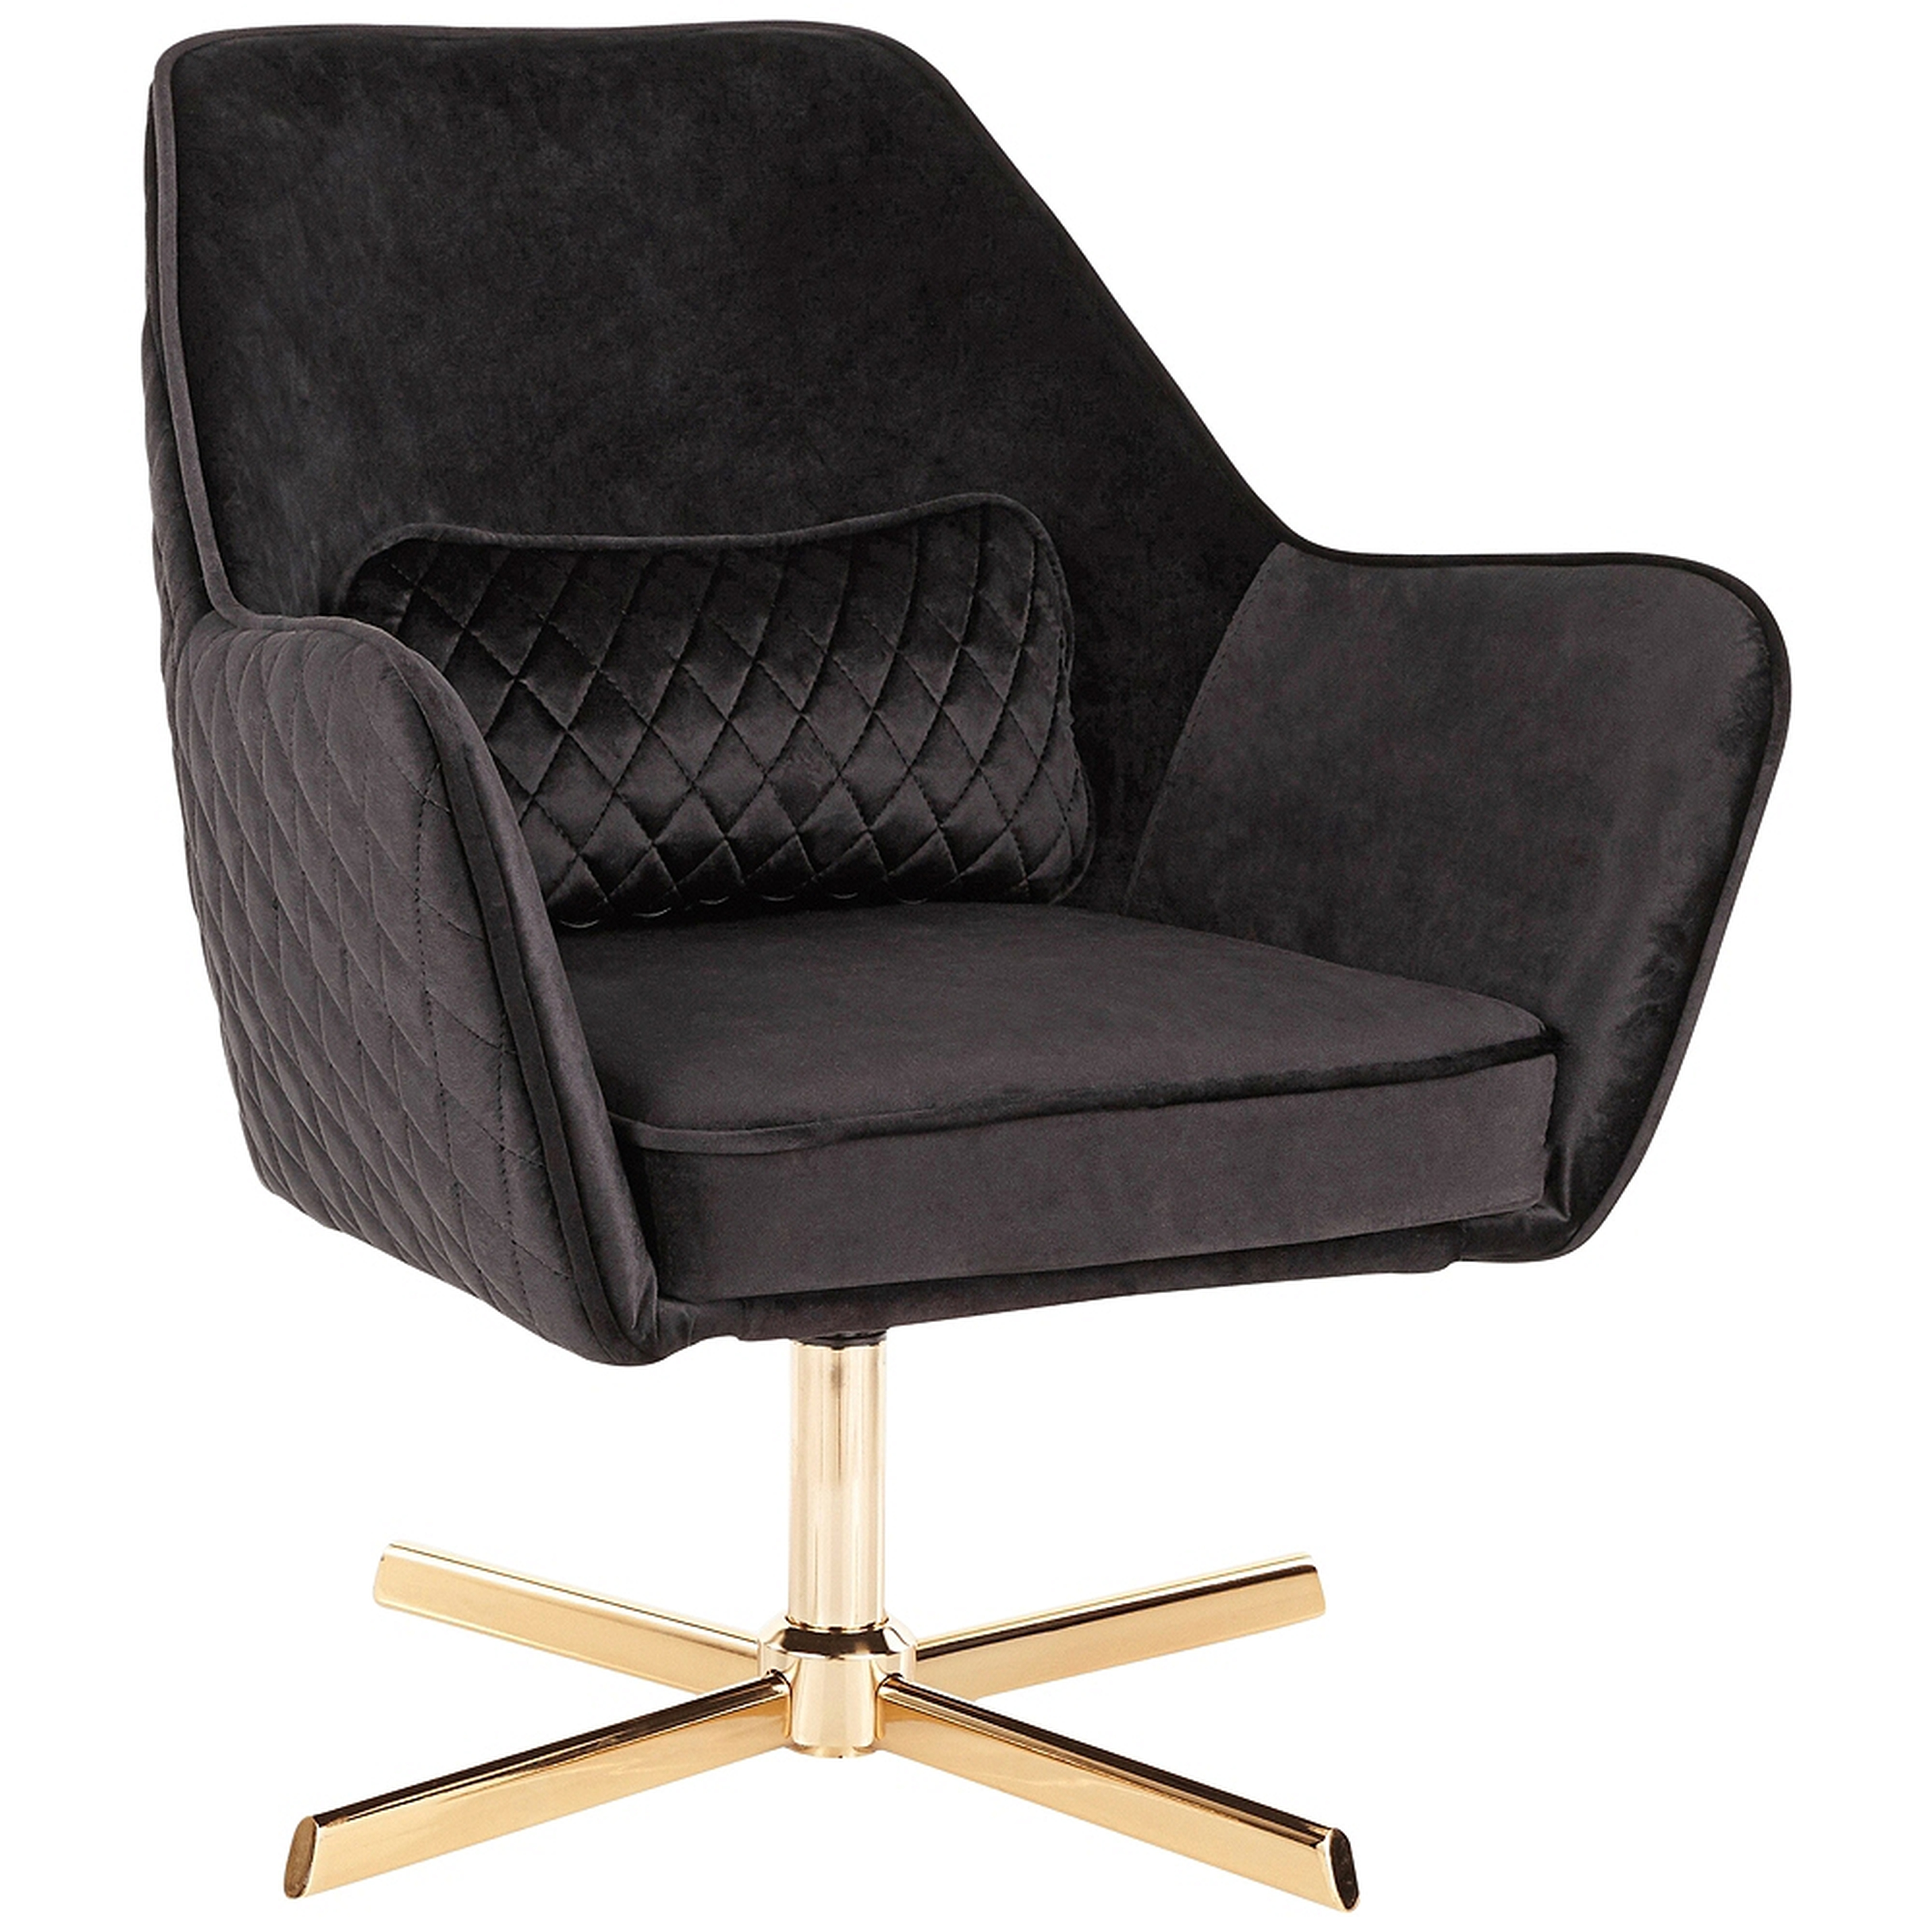 Diana Black Velvet and Gold Metal Swivel Lounge Chair - Style # 67W67 - Lamps Plus